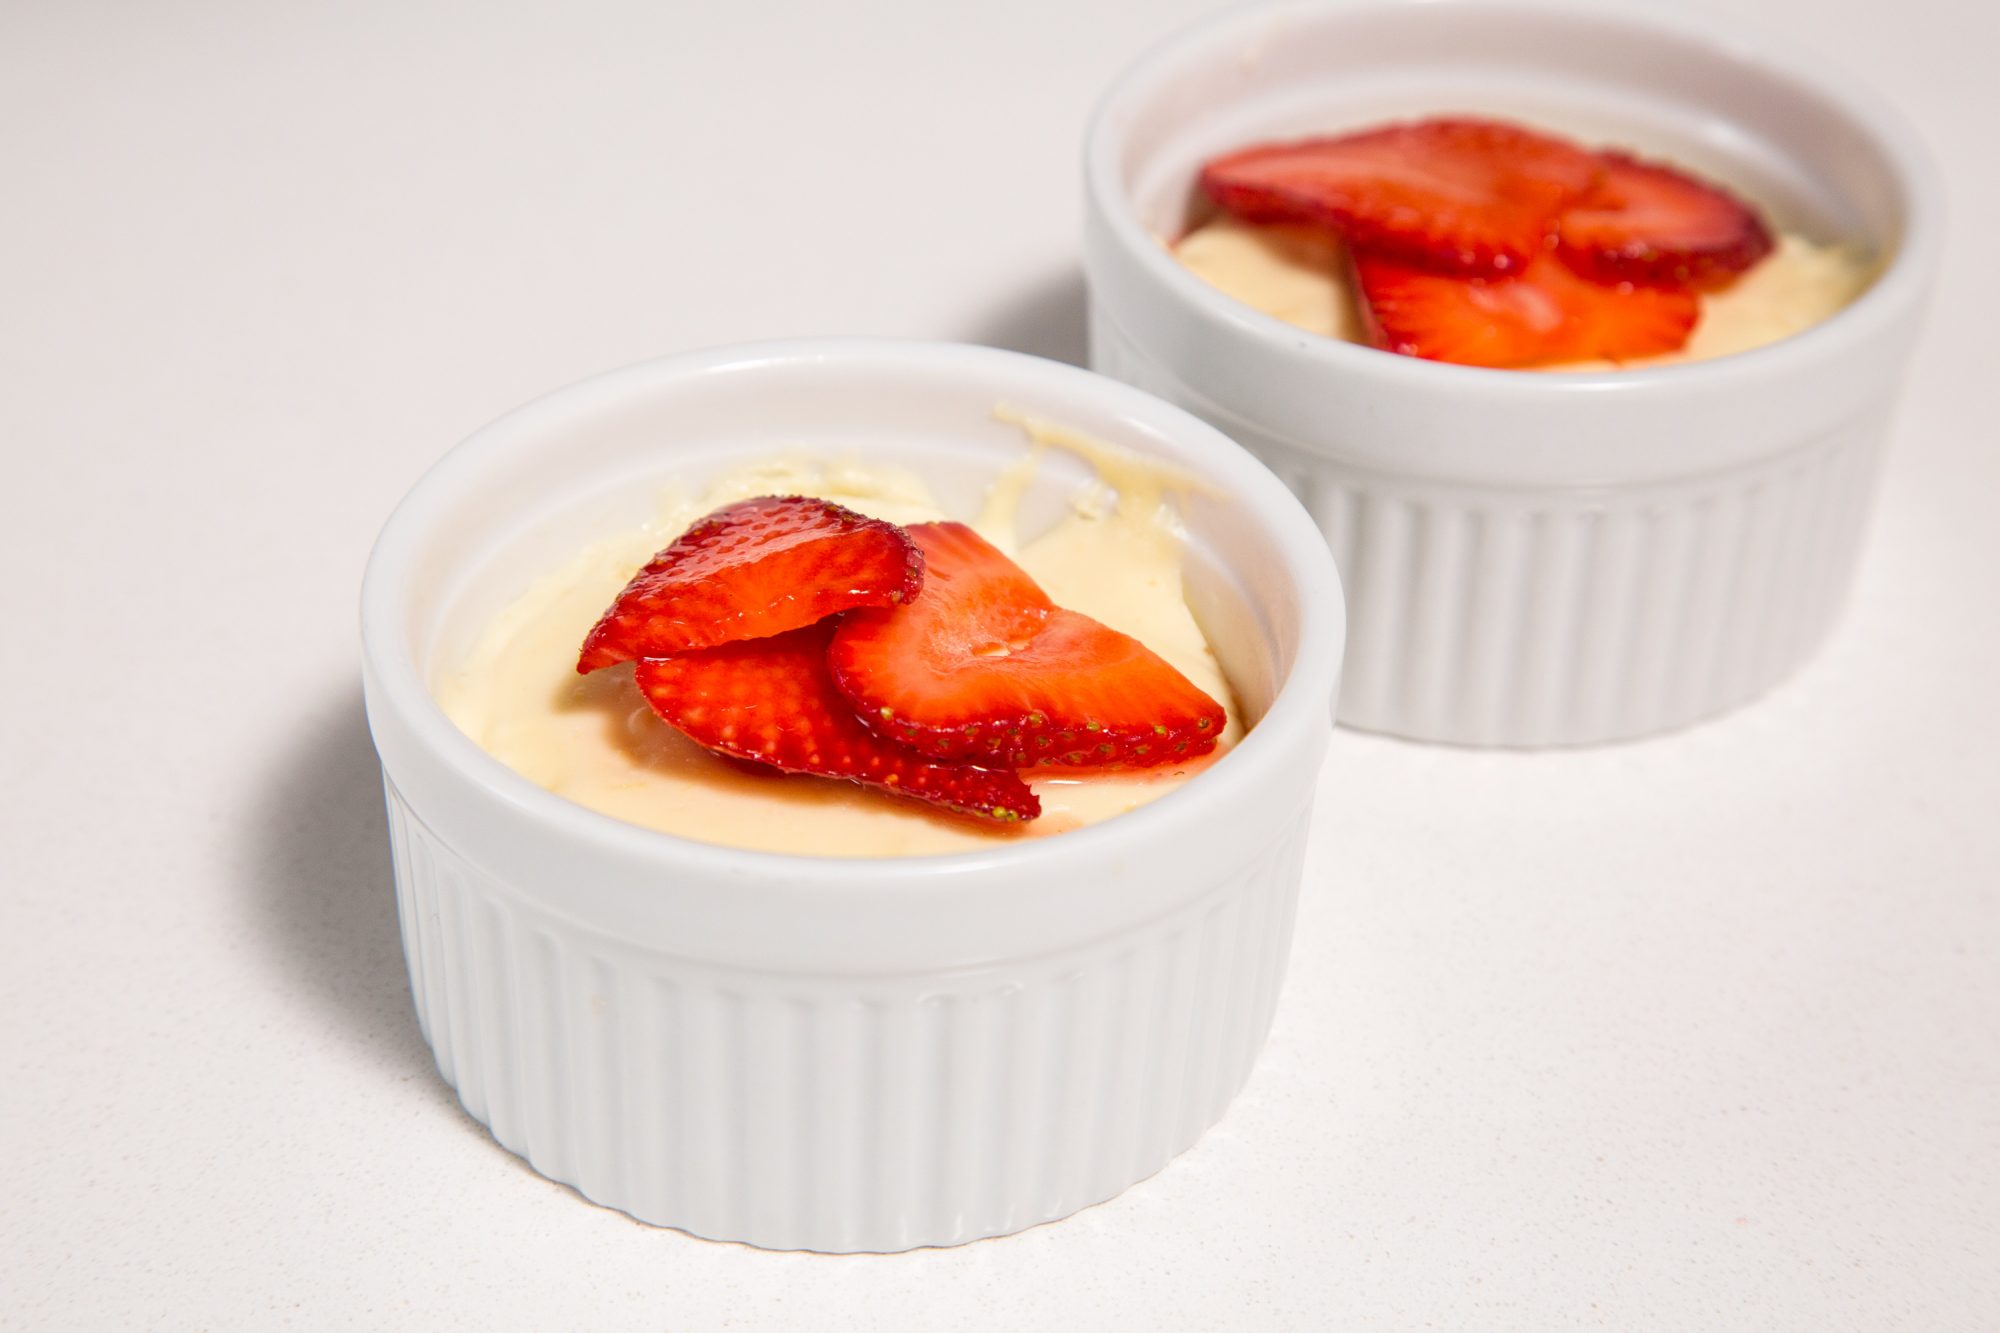 cl-Gingered-Grapefruit Cheesecake image